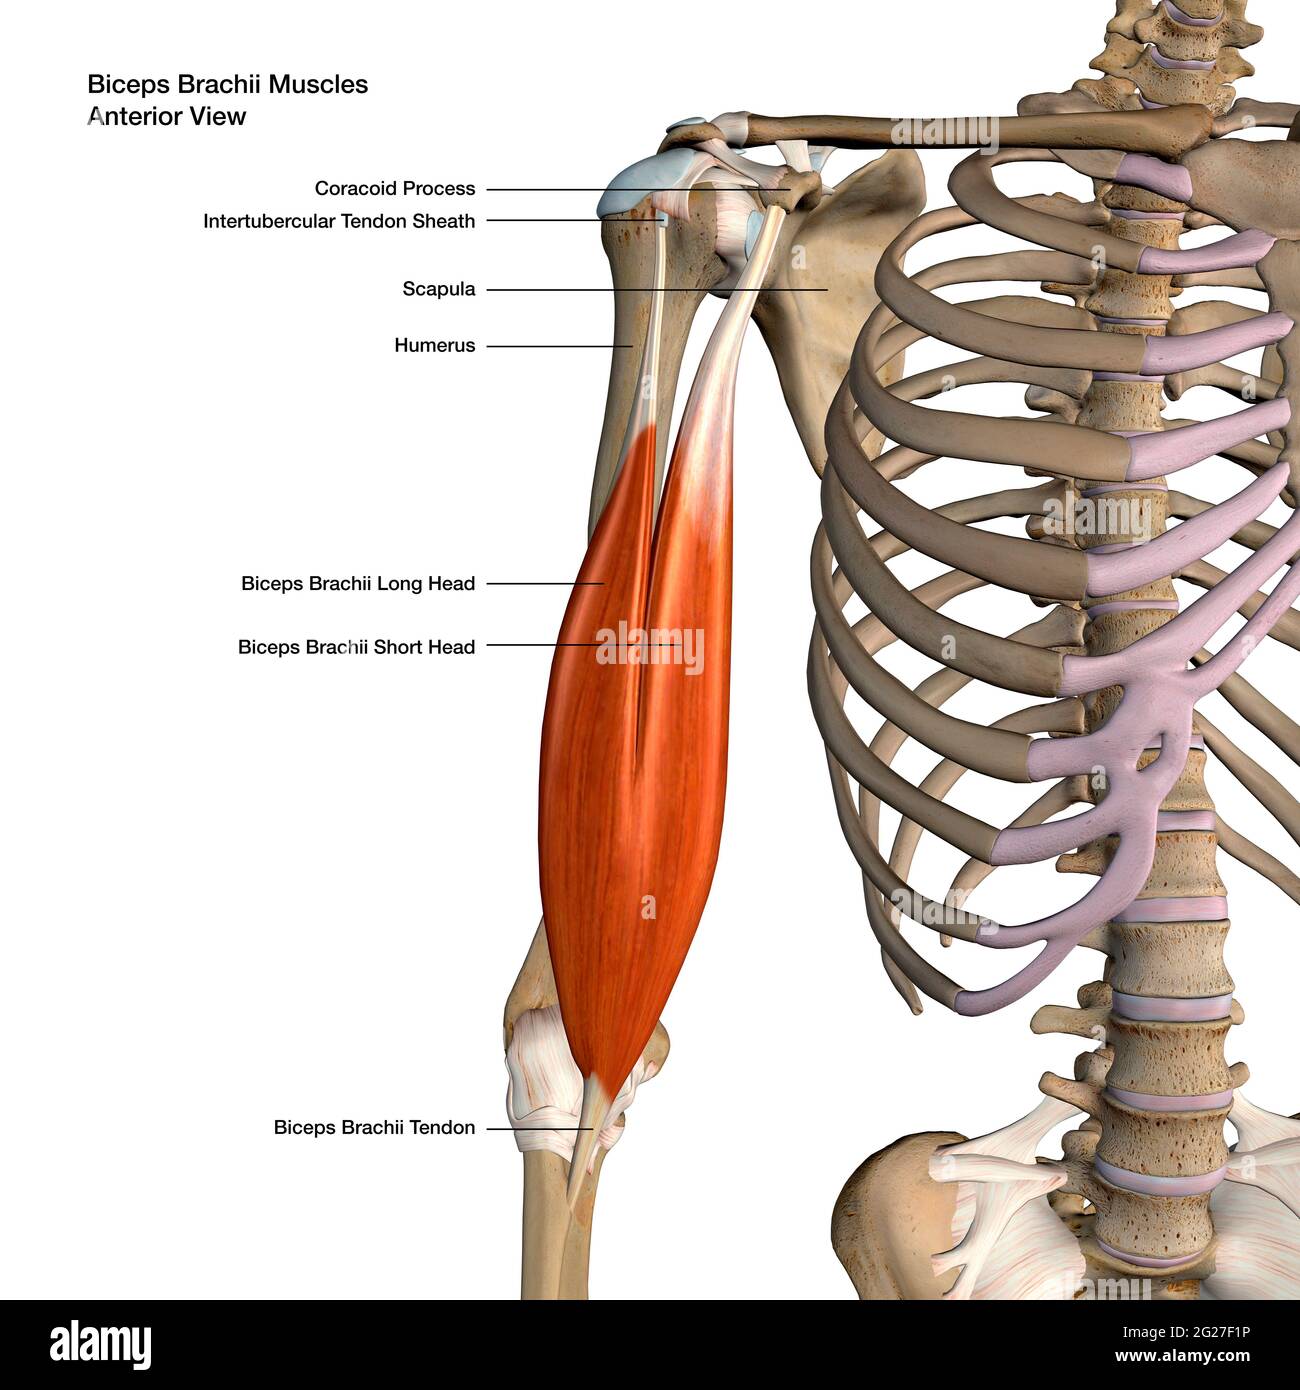 3D rendering of biceps brachii muscles isolated in anterior view with lables. Stock Photo